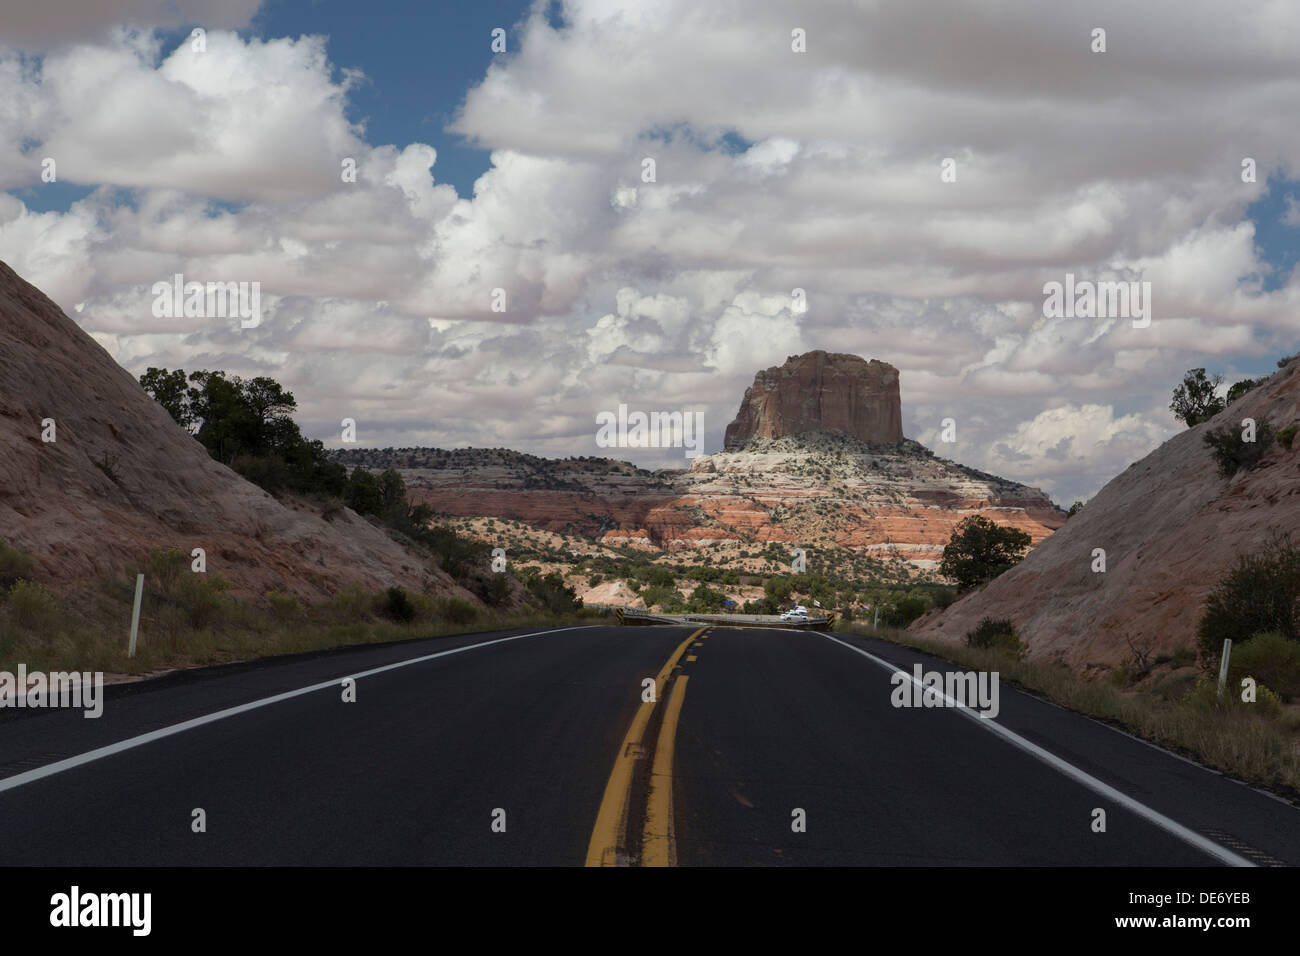 highway 98 square butte navajo reservation arizona Stock Photo